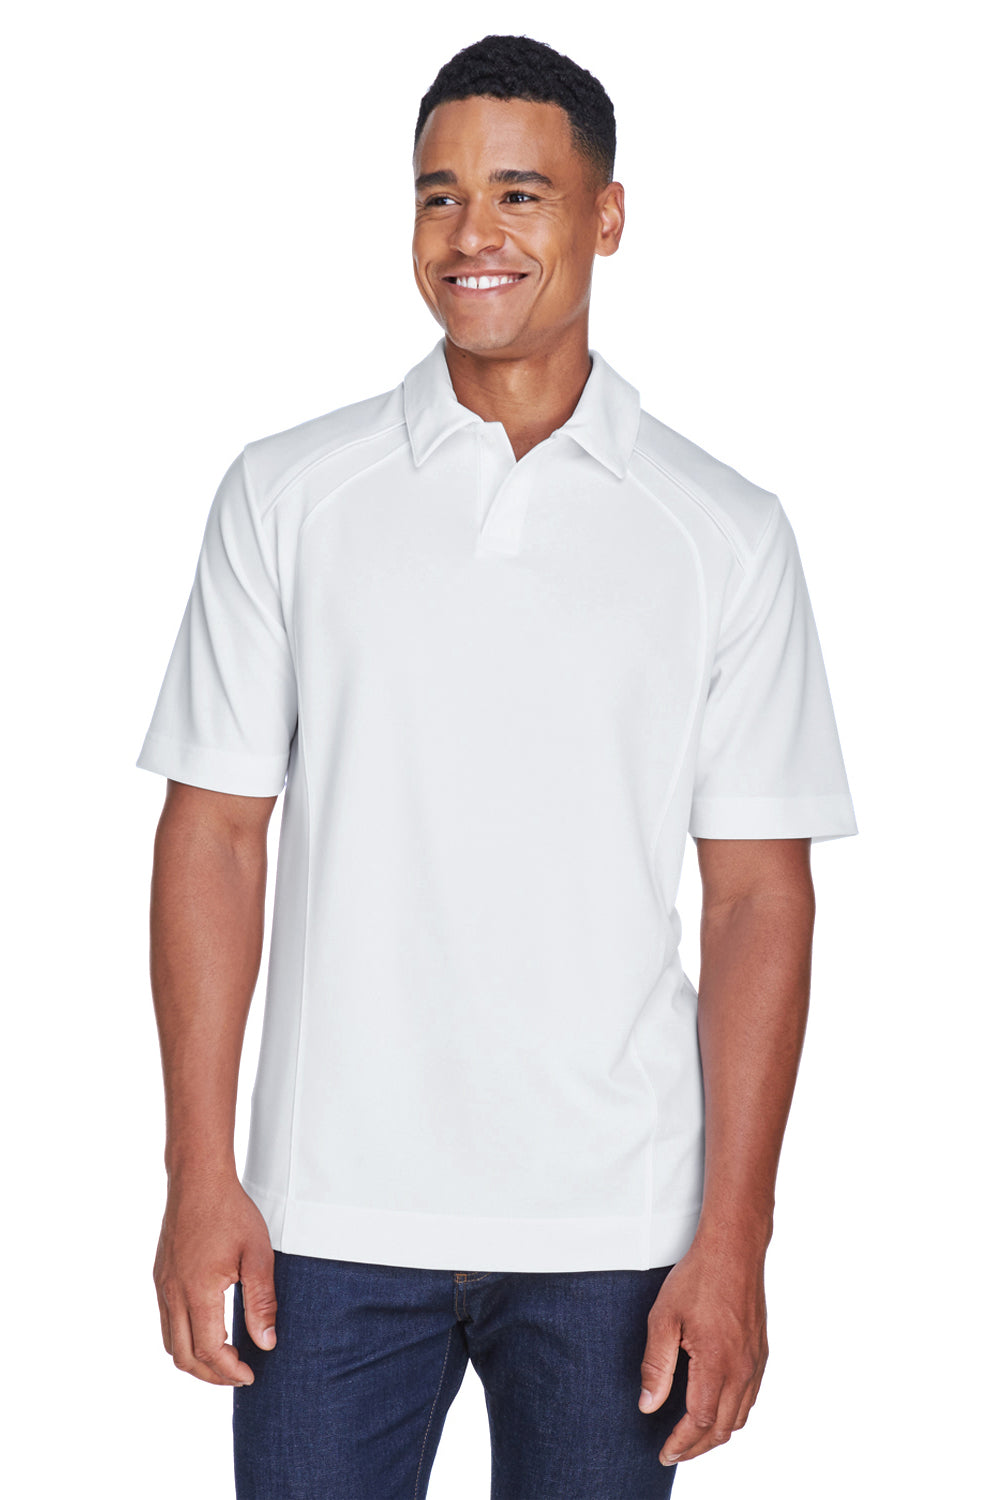 North End 88632 Mens Sport Red Performance Moisture Wicking Short Sleeve Polo Shirt White Front